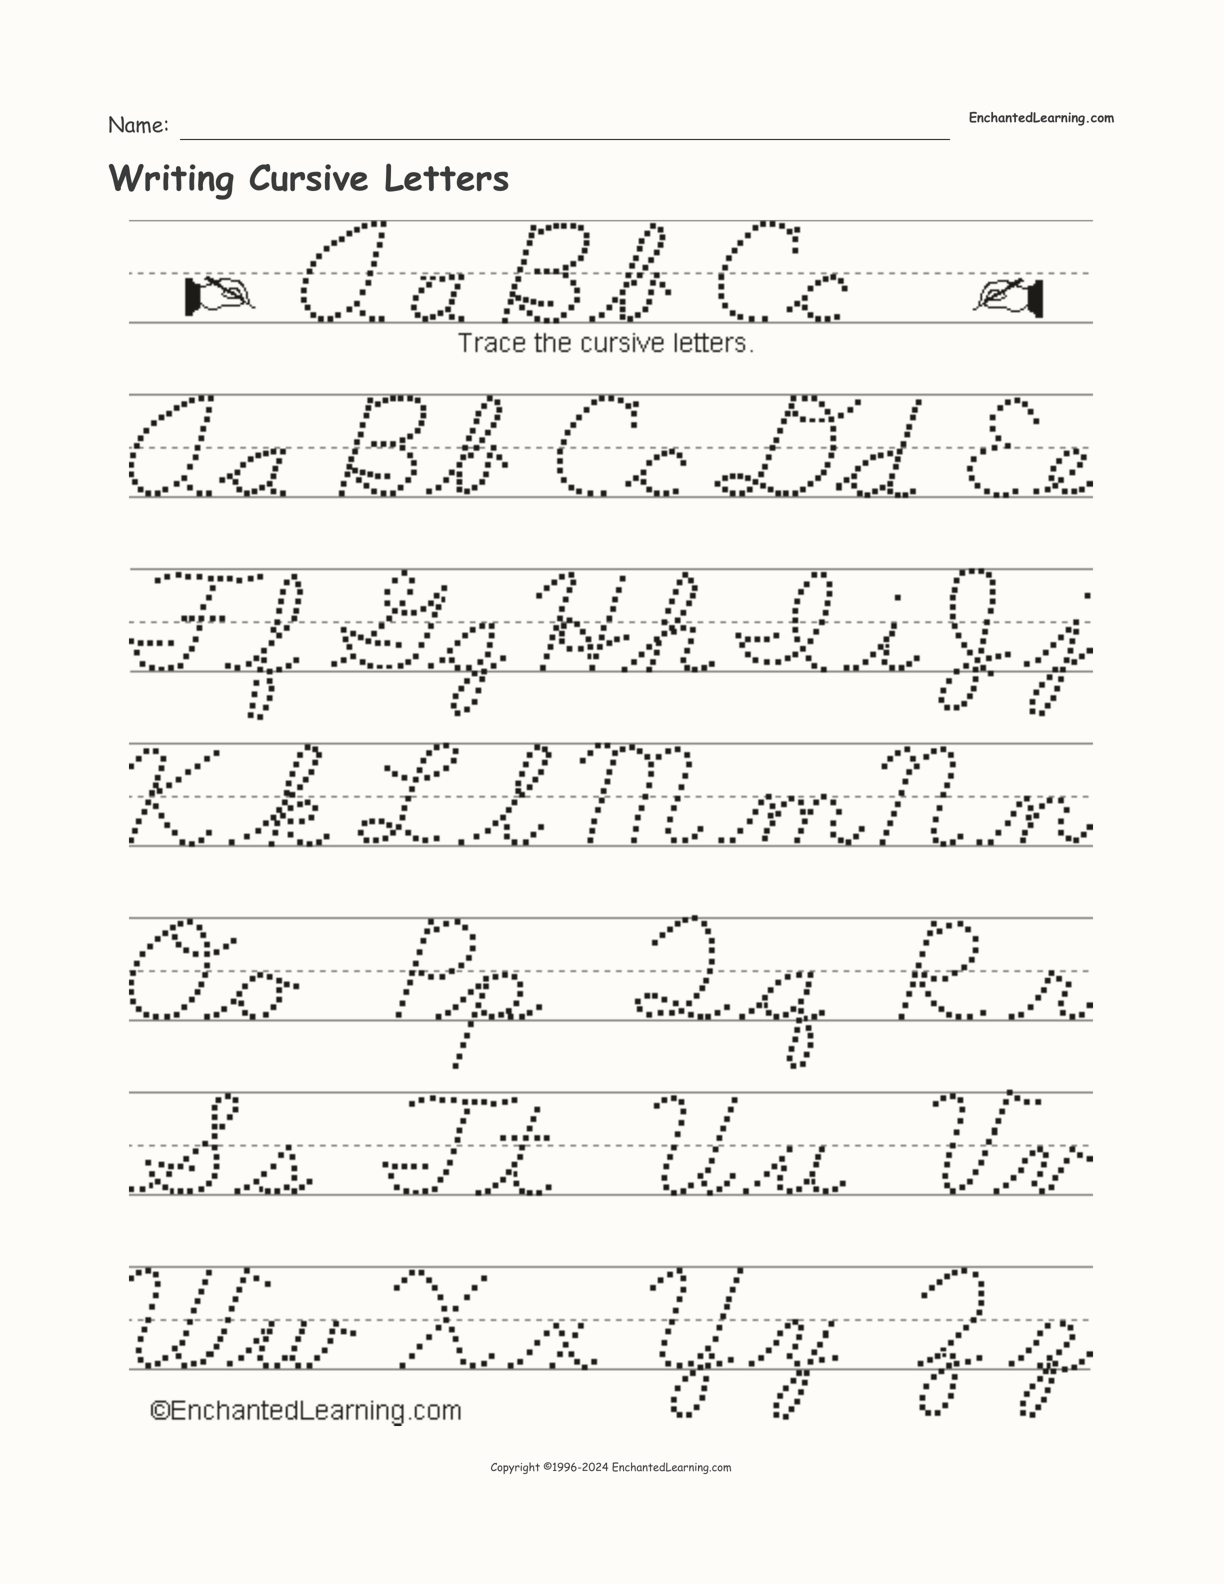 Writing Cursive Letters interactive worksheet page 1